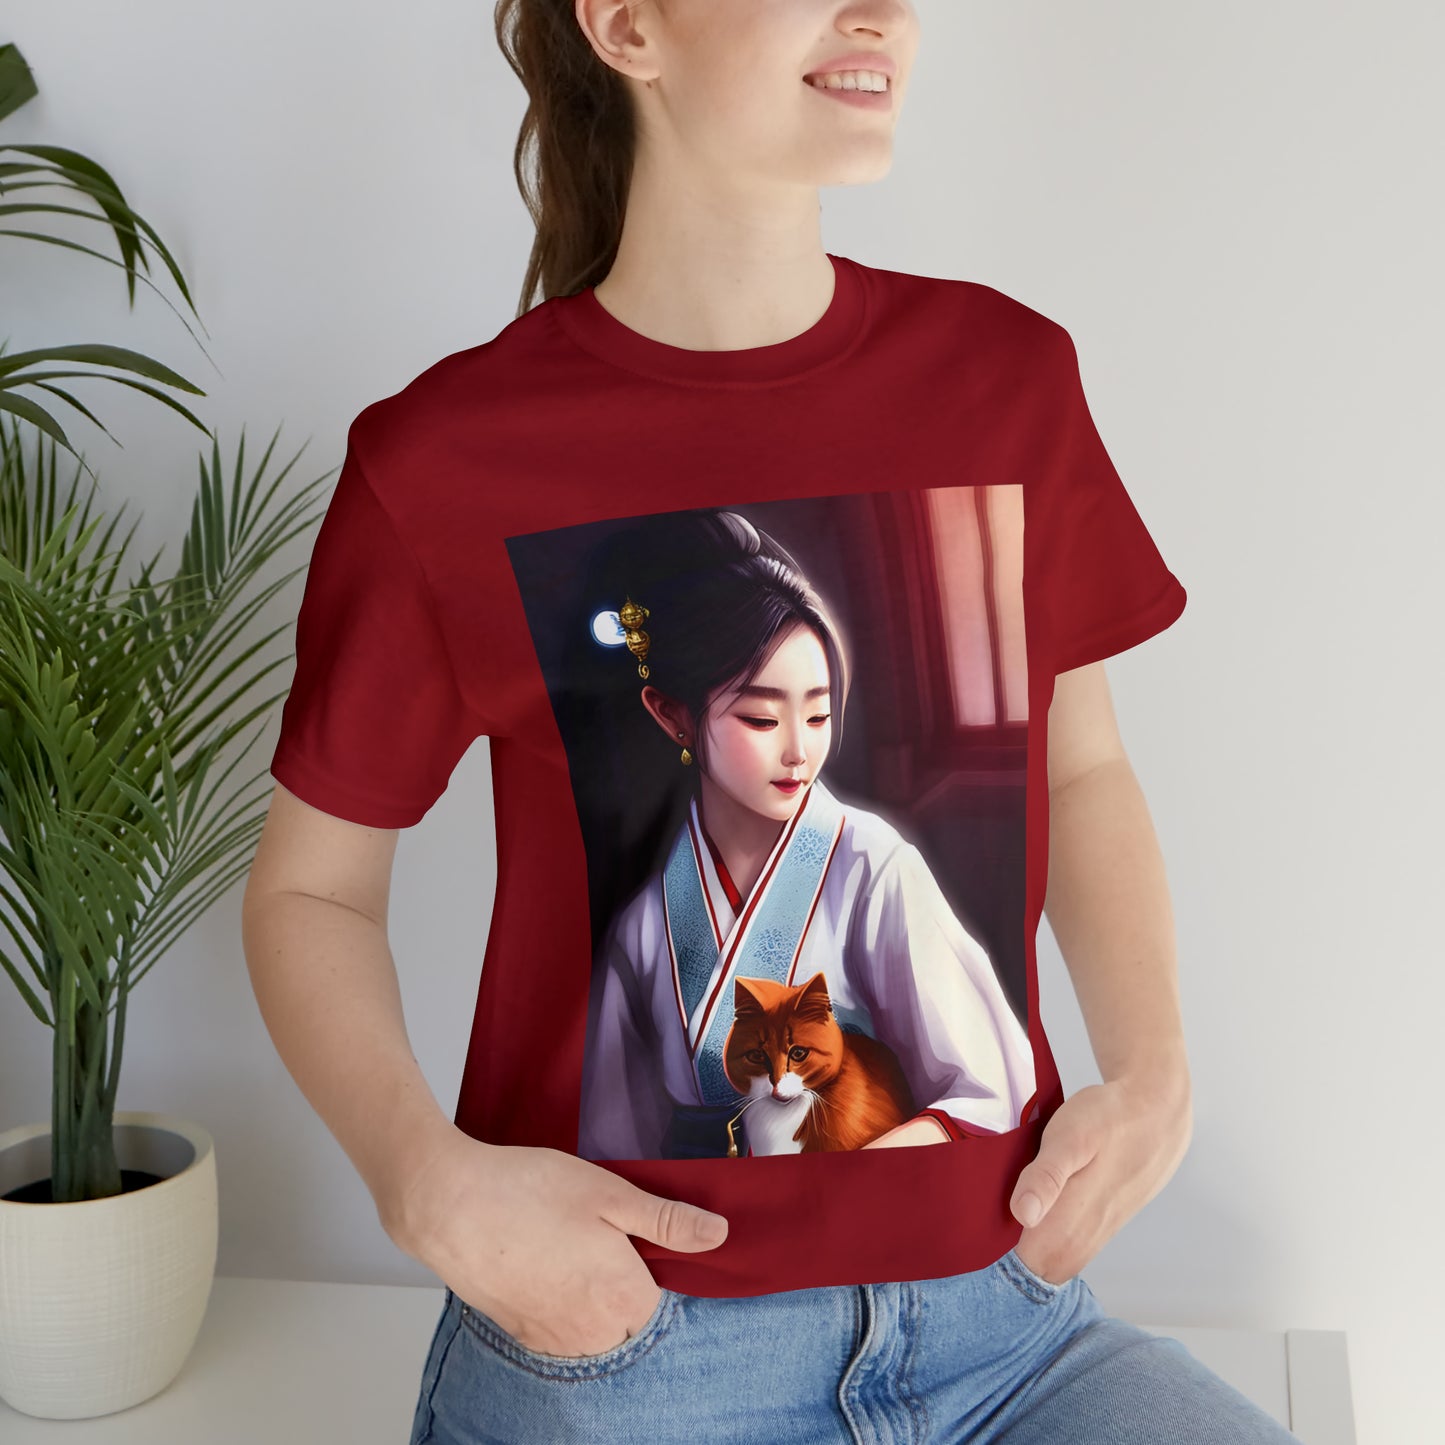 Geisha and ginger cat T-shirt, maiko cat shirt, feudal japan aesthetic cat Tee, girl in a kimono cat lover gift, anime cat aesthetic shirt